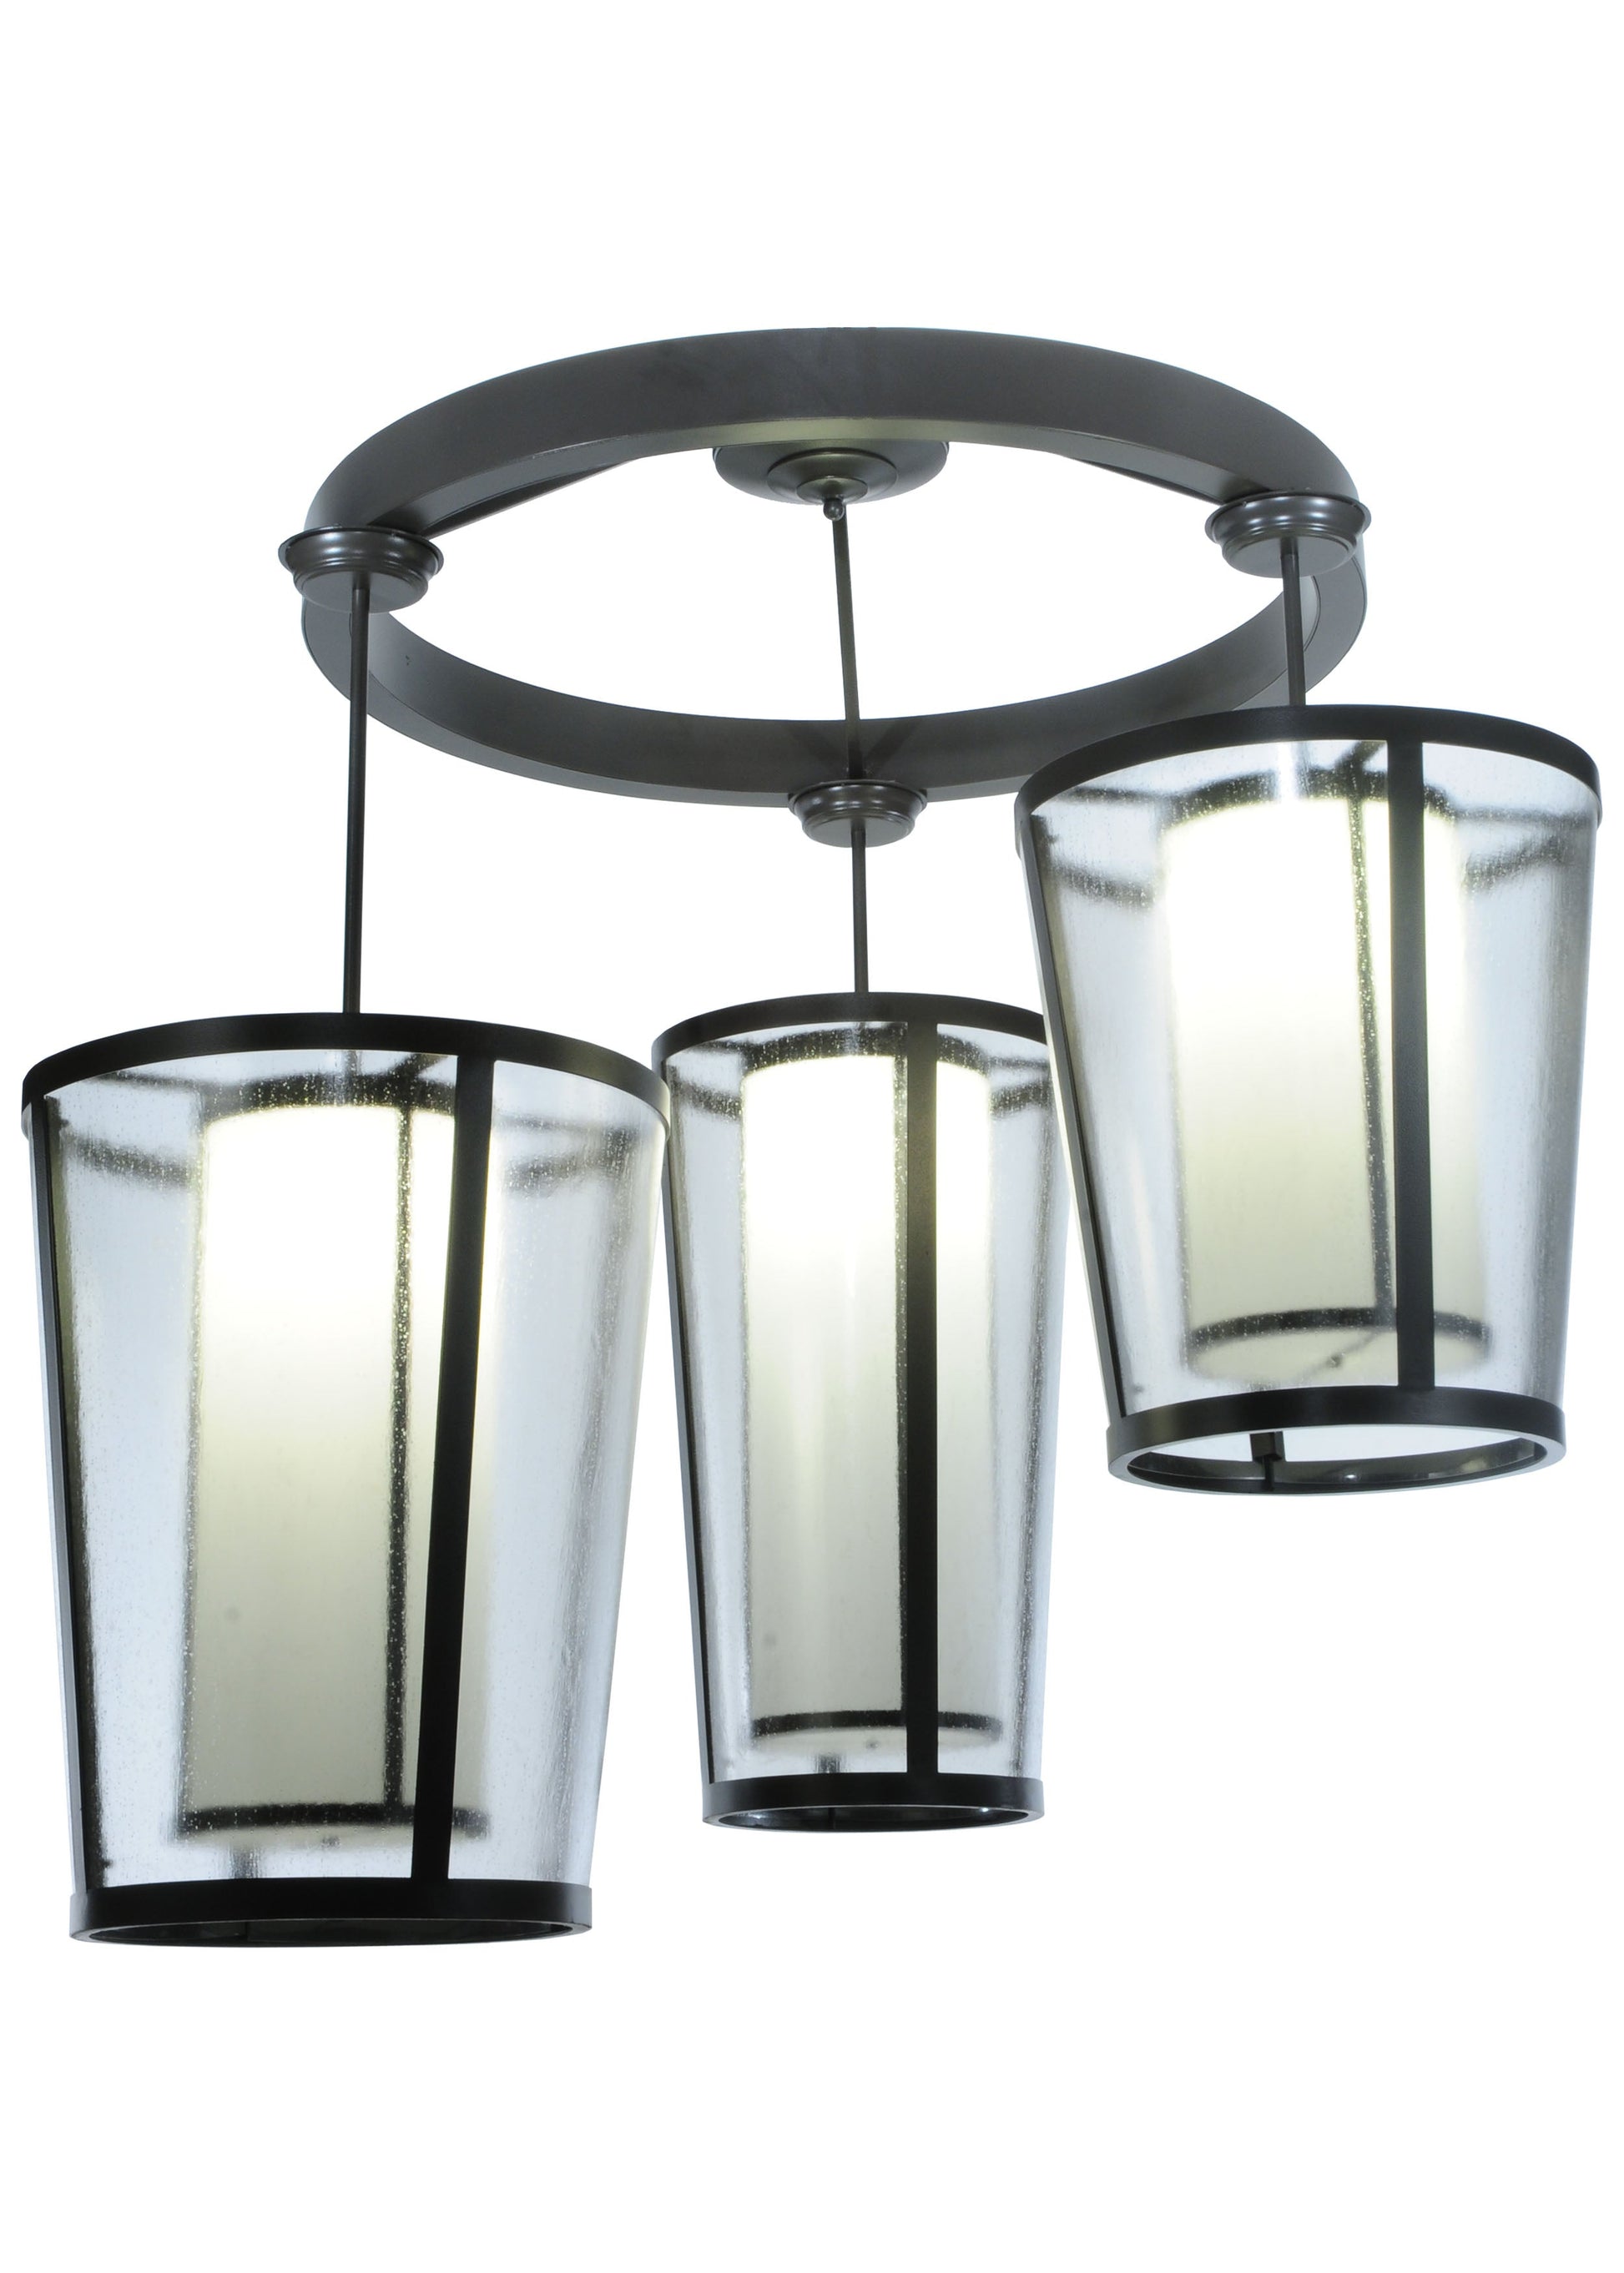 74" Cilindro Tapered 3-Light Cascading Pendant by 2nd Ave Lighting